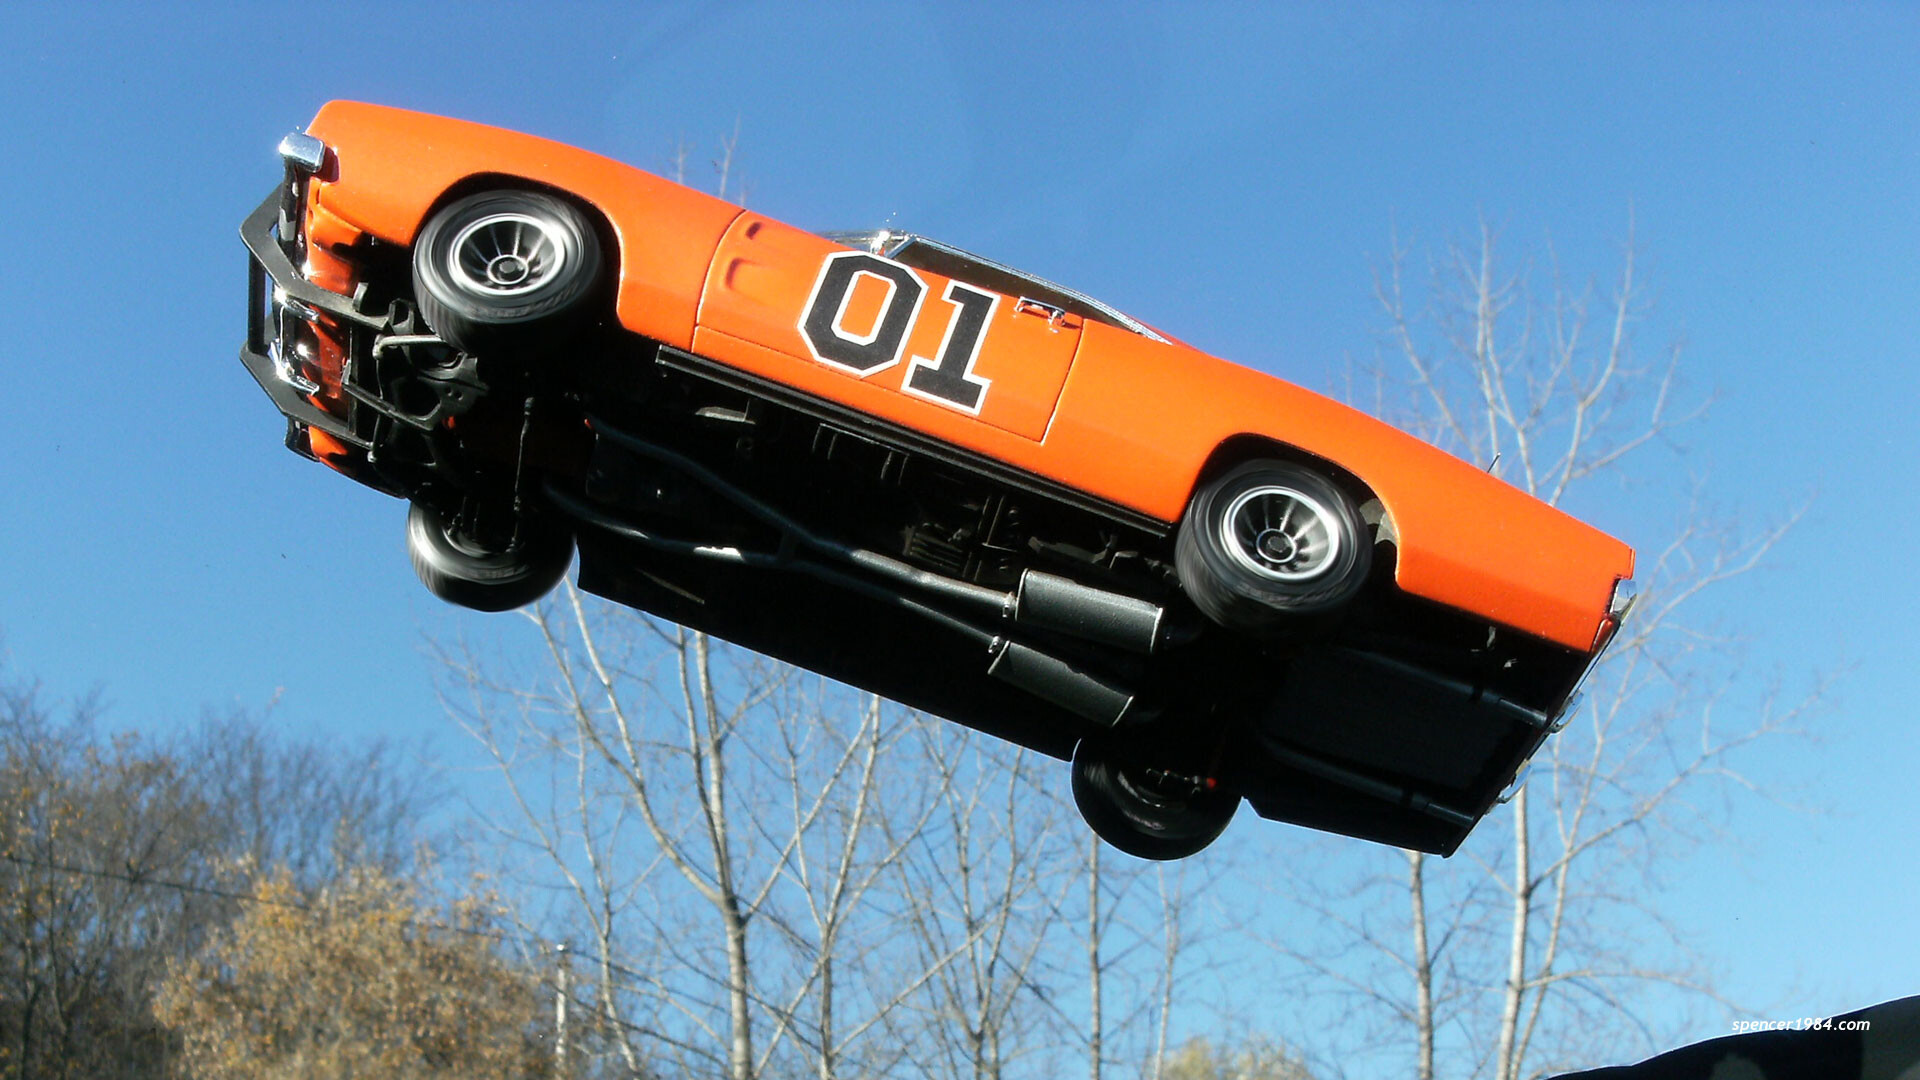 General Lee Car: The movie General performing flies and makes controlled landings, The car jumps performed for the 1979 TV show. 1920x1080 Full HD Wallpaper.